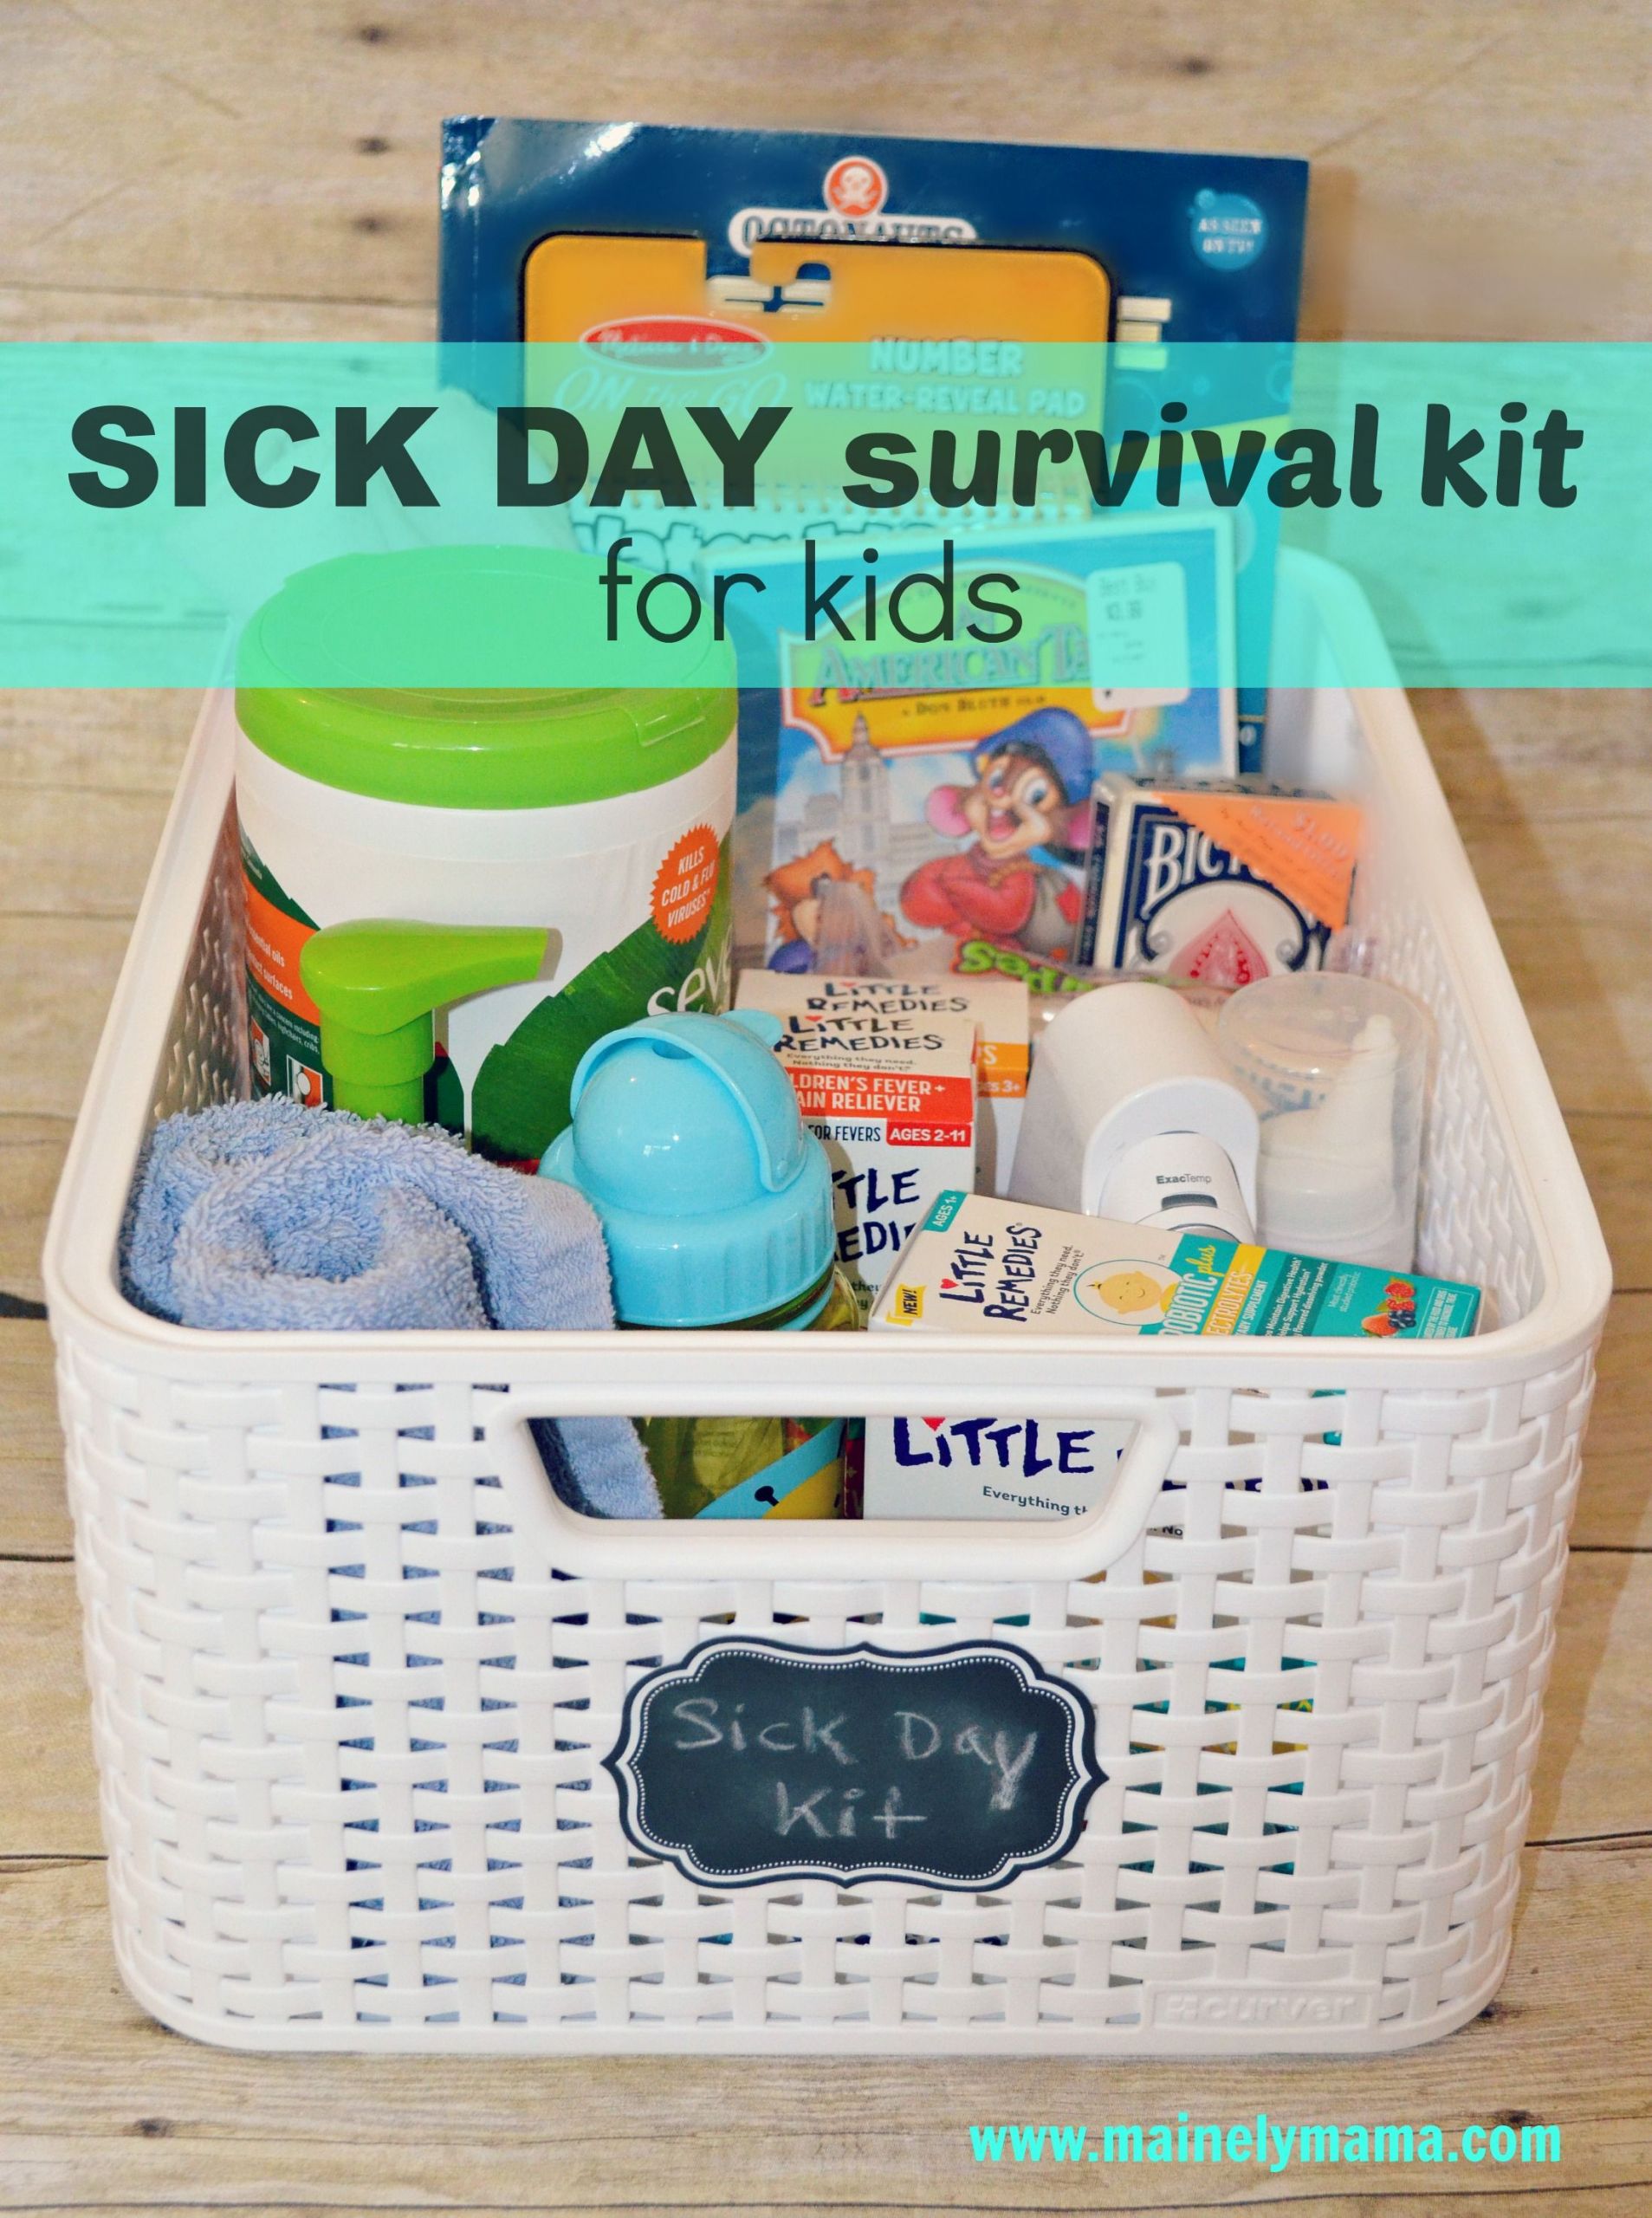 Gifts For Sick Kids
 Be prepared with this SICK DAY survival kit for kids ad